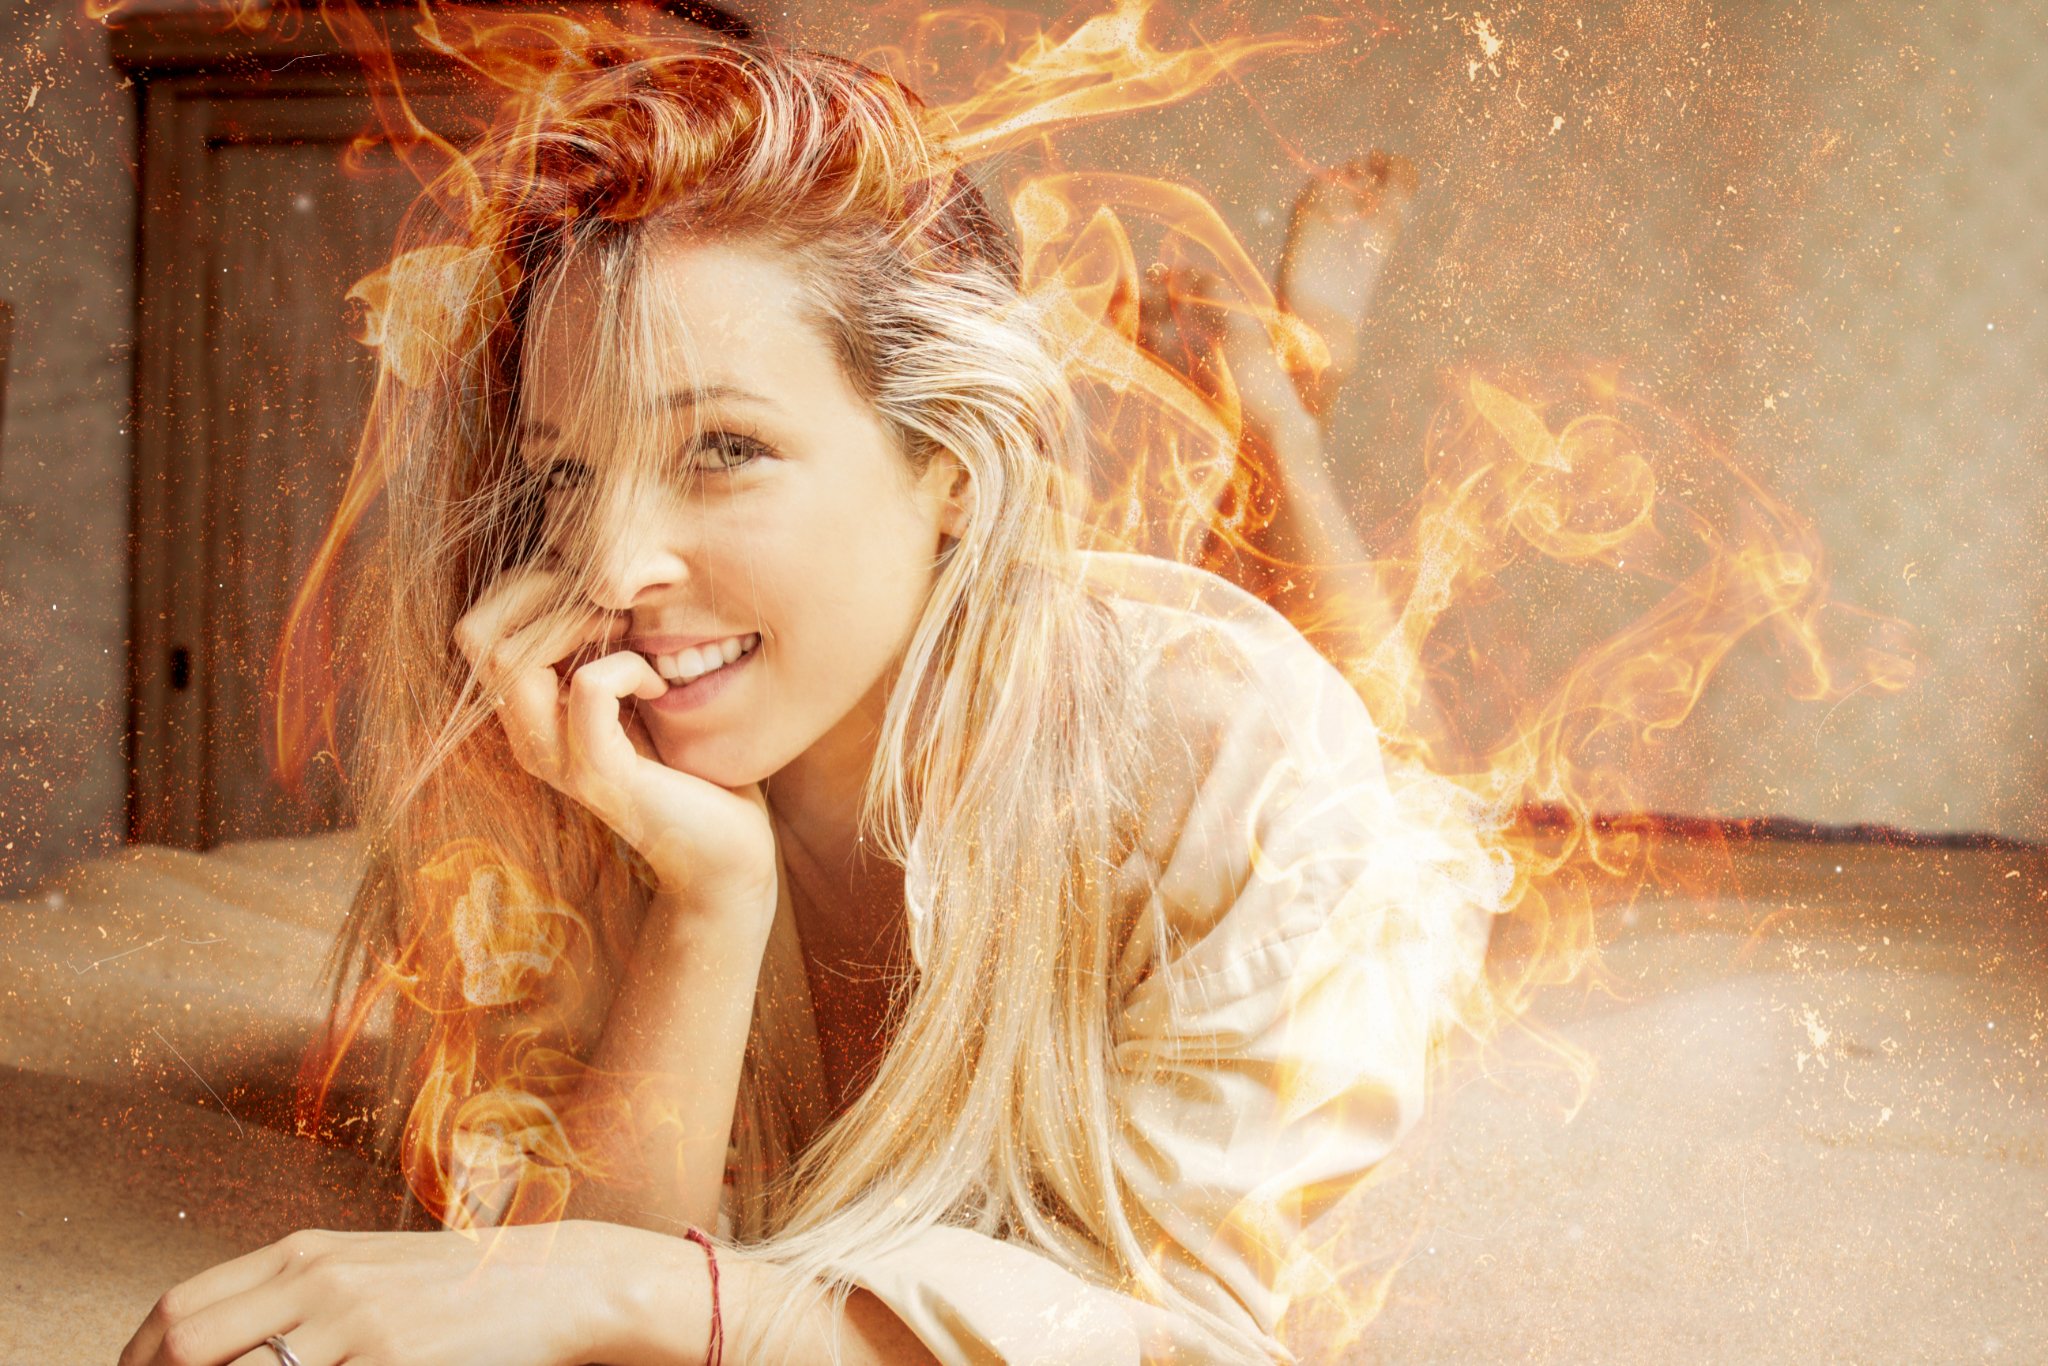 affinity fireeffect on images 764